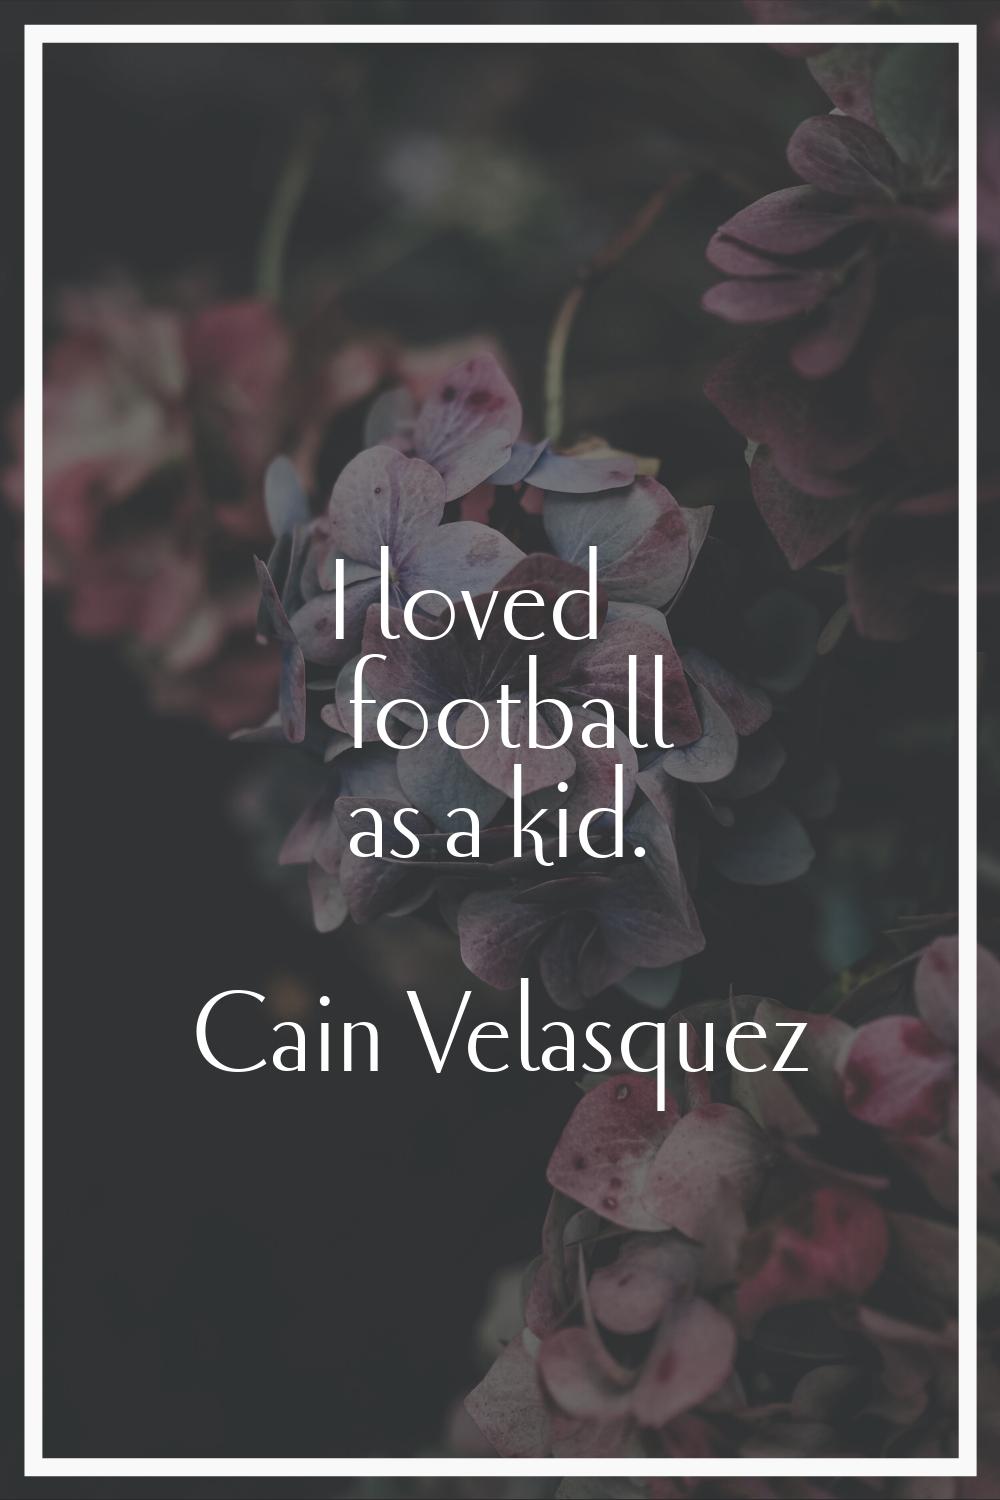 I loved football as a kid.